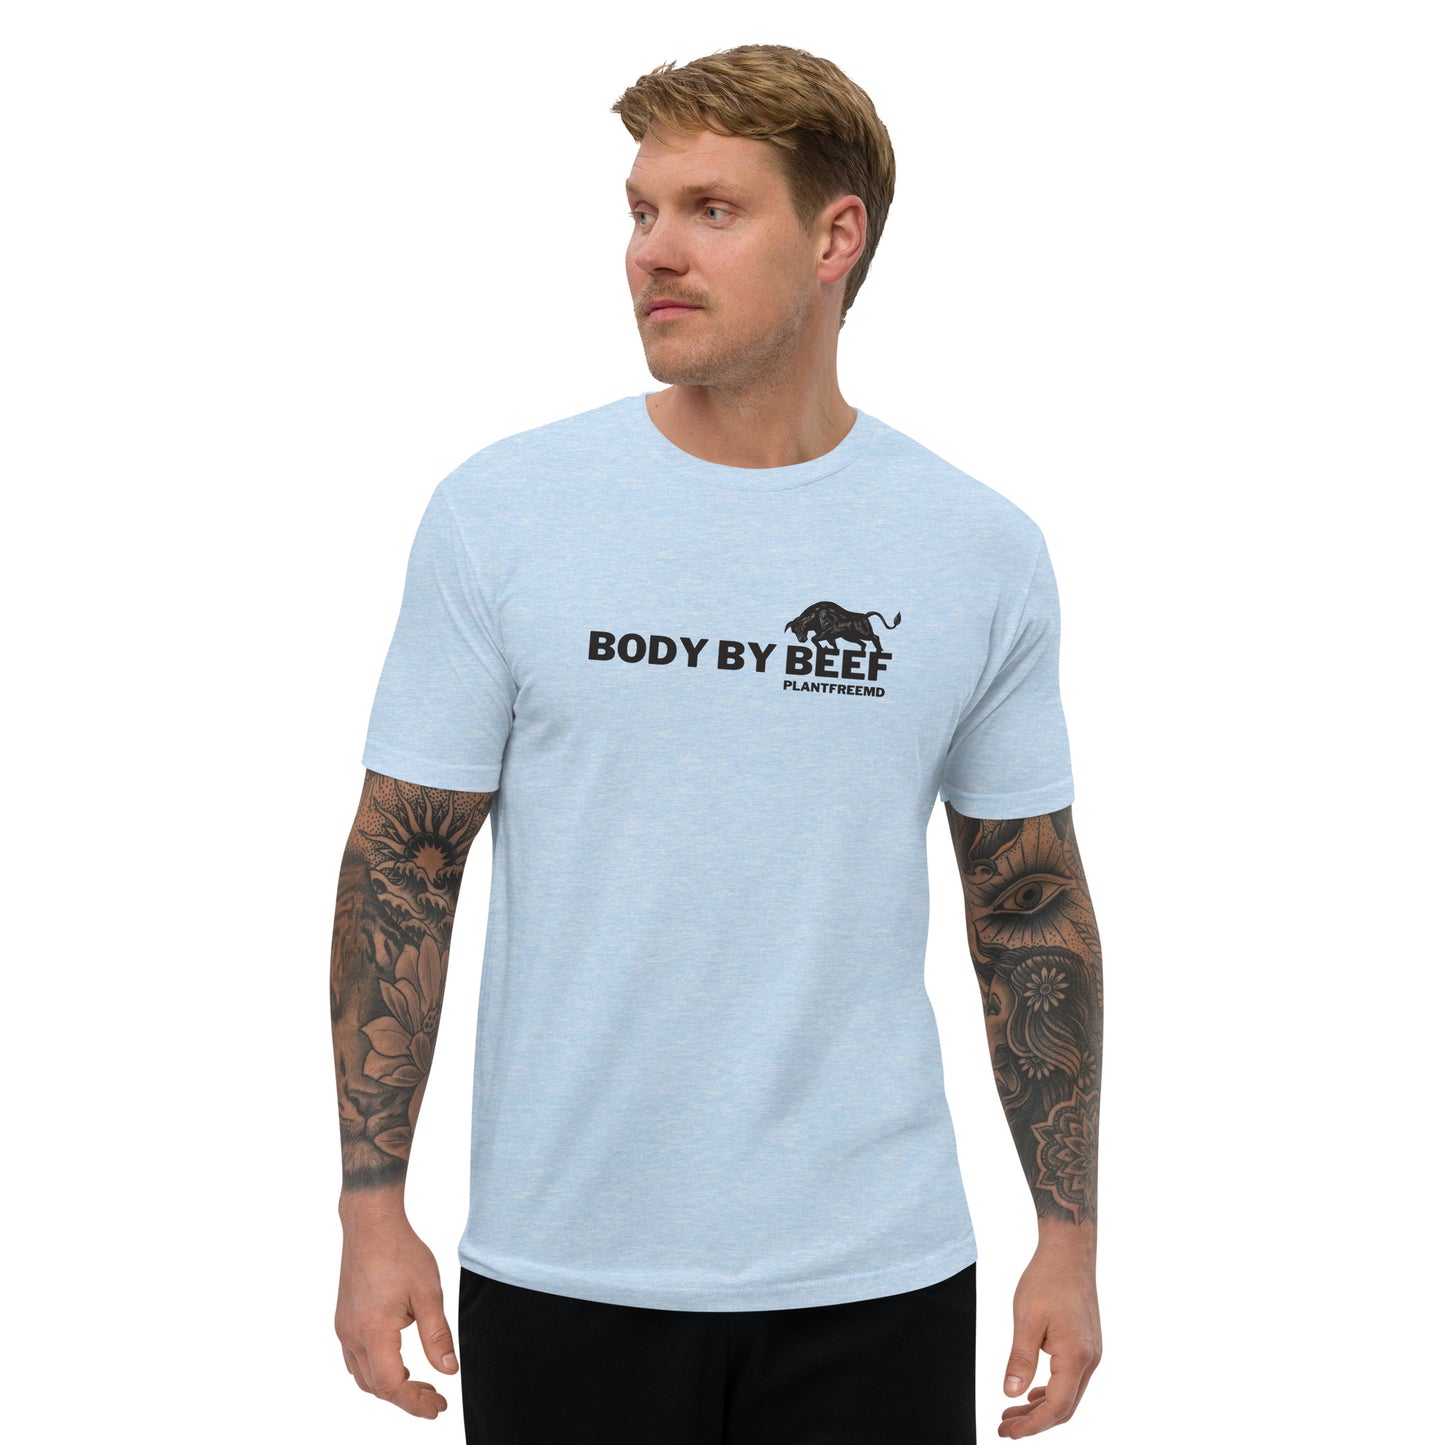 Body By Beef 2 Men's Fitted T-shirt